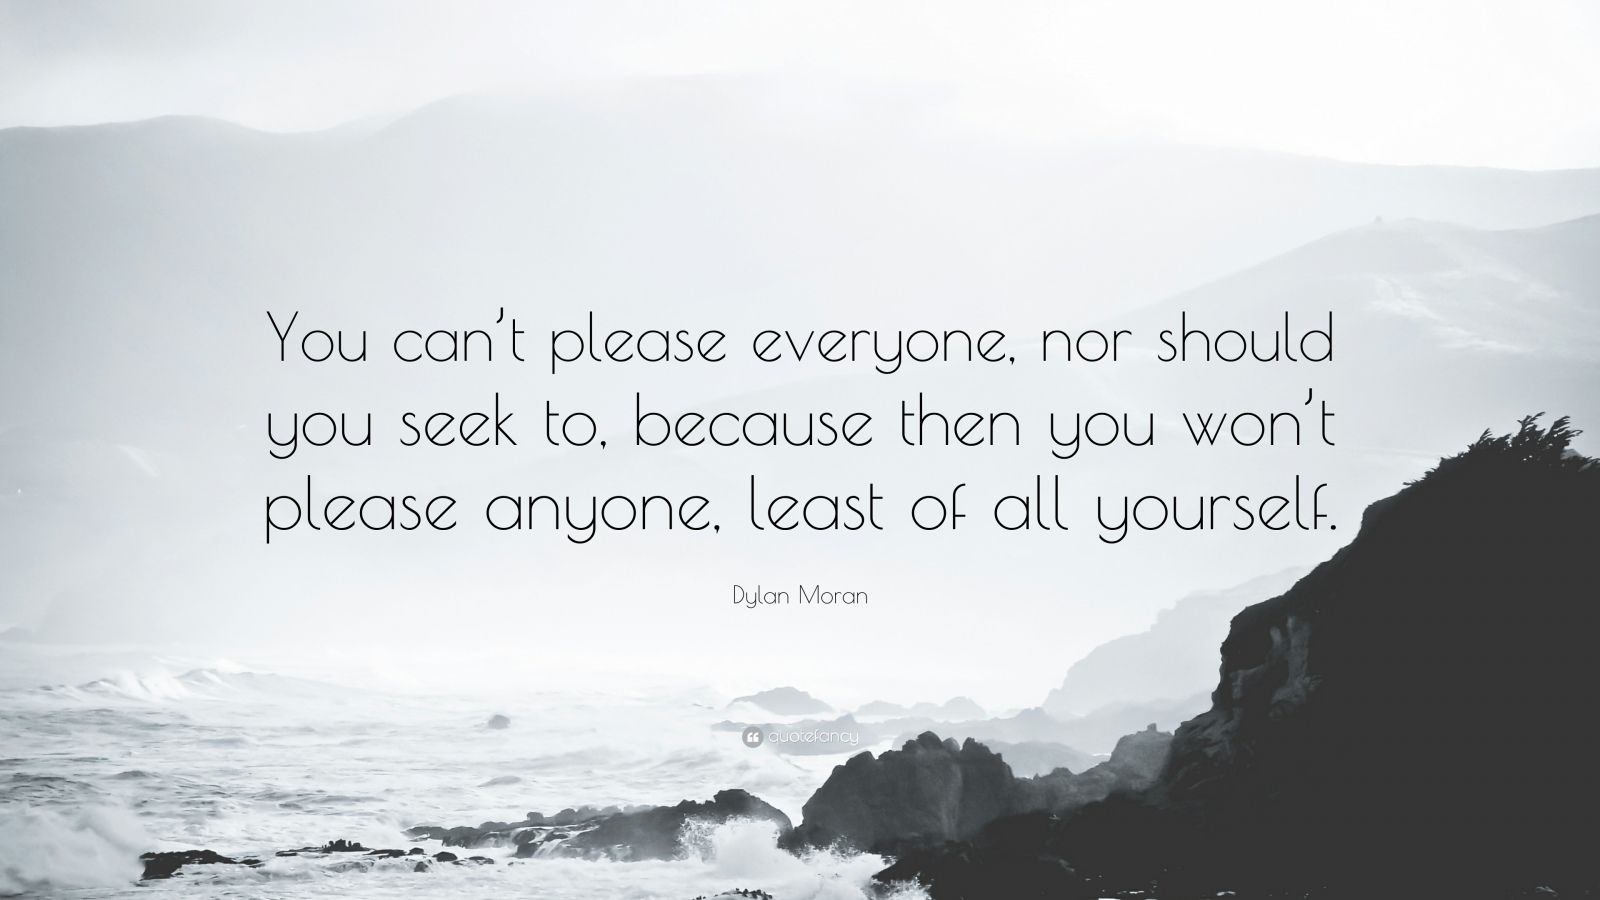 Dylan Moran Quote: “You can't please everyone, nor should you seek to,  because then you